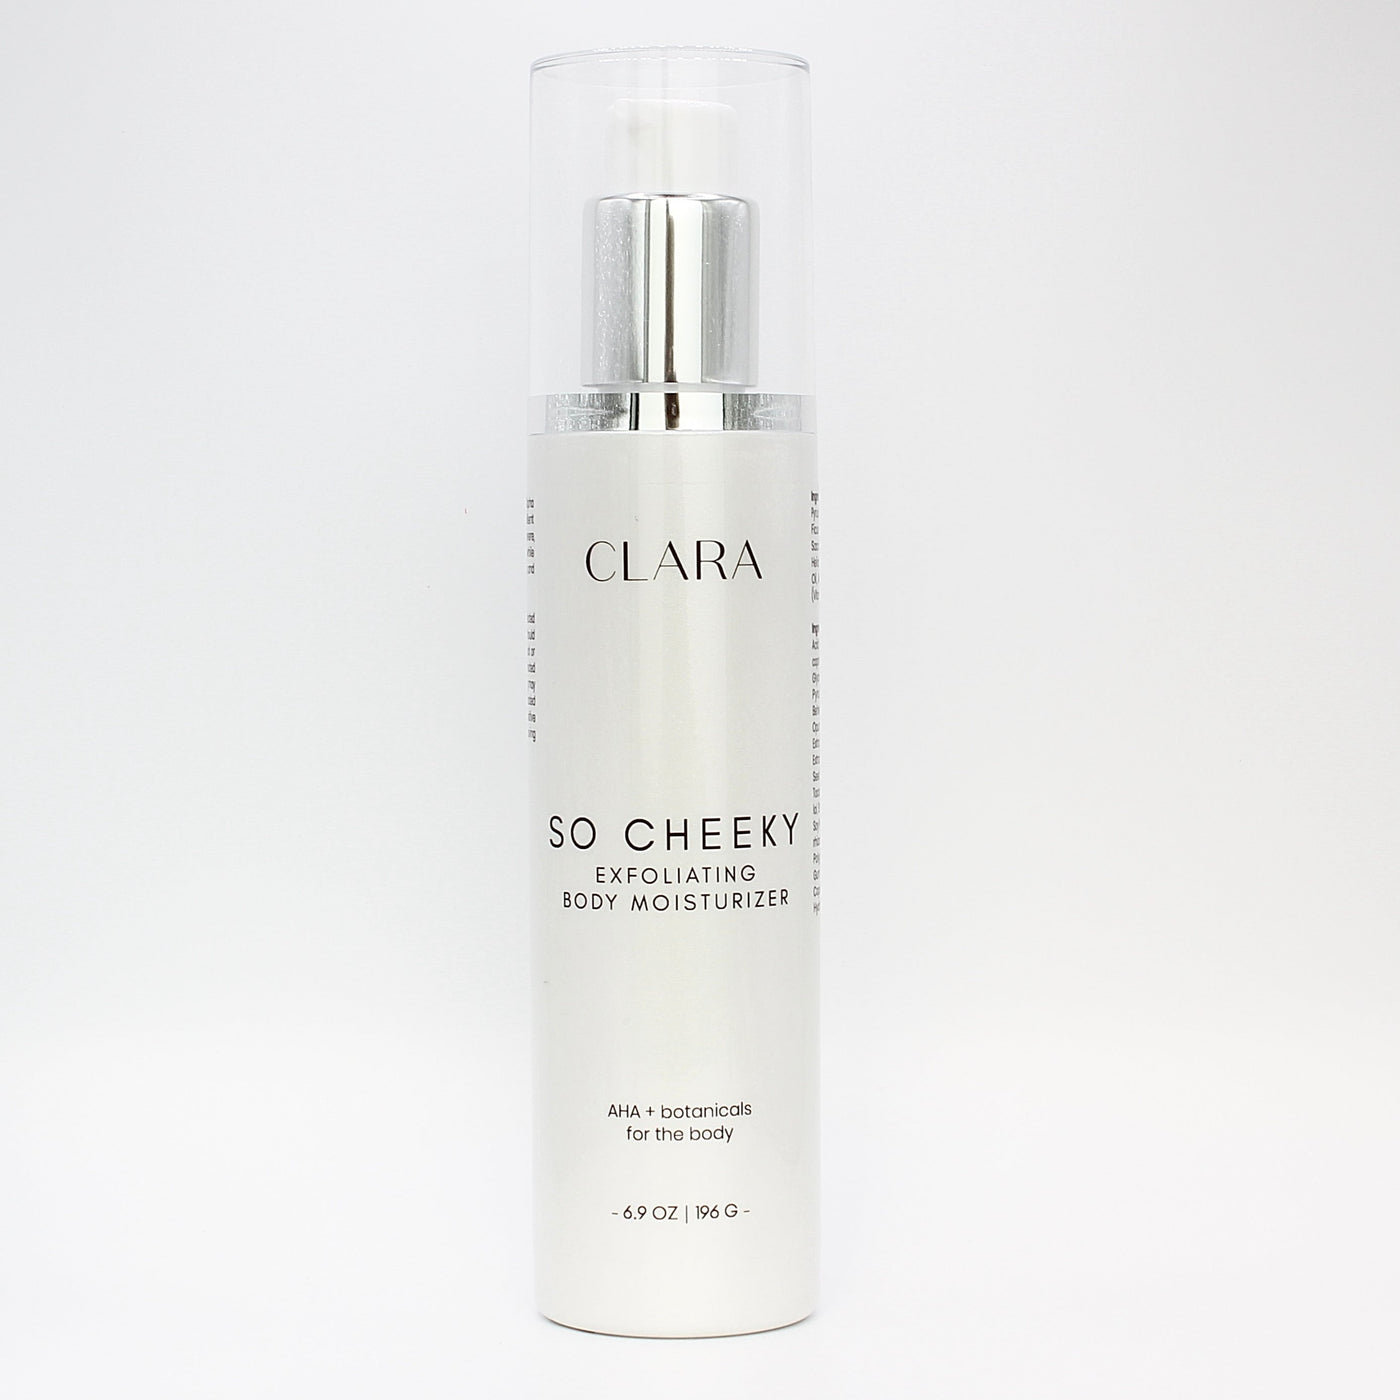 So Cheeky Moisturizer: A blend of alpha-hydroxy acids and hydrating botanical extracts combine to give you smooth, supple skin from head-to-toe